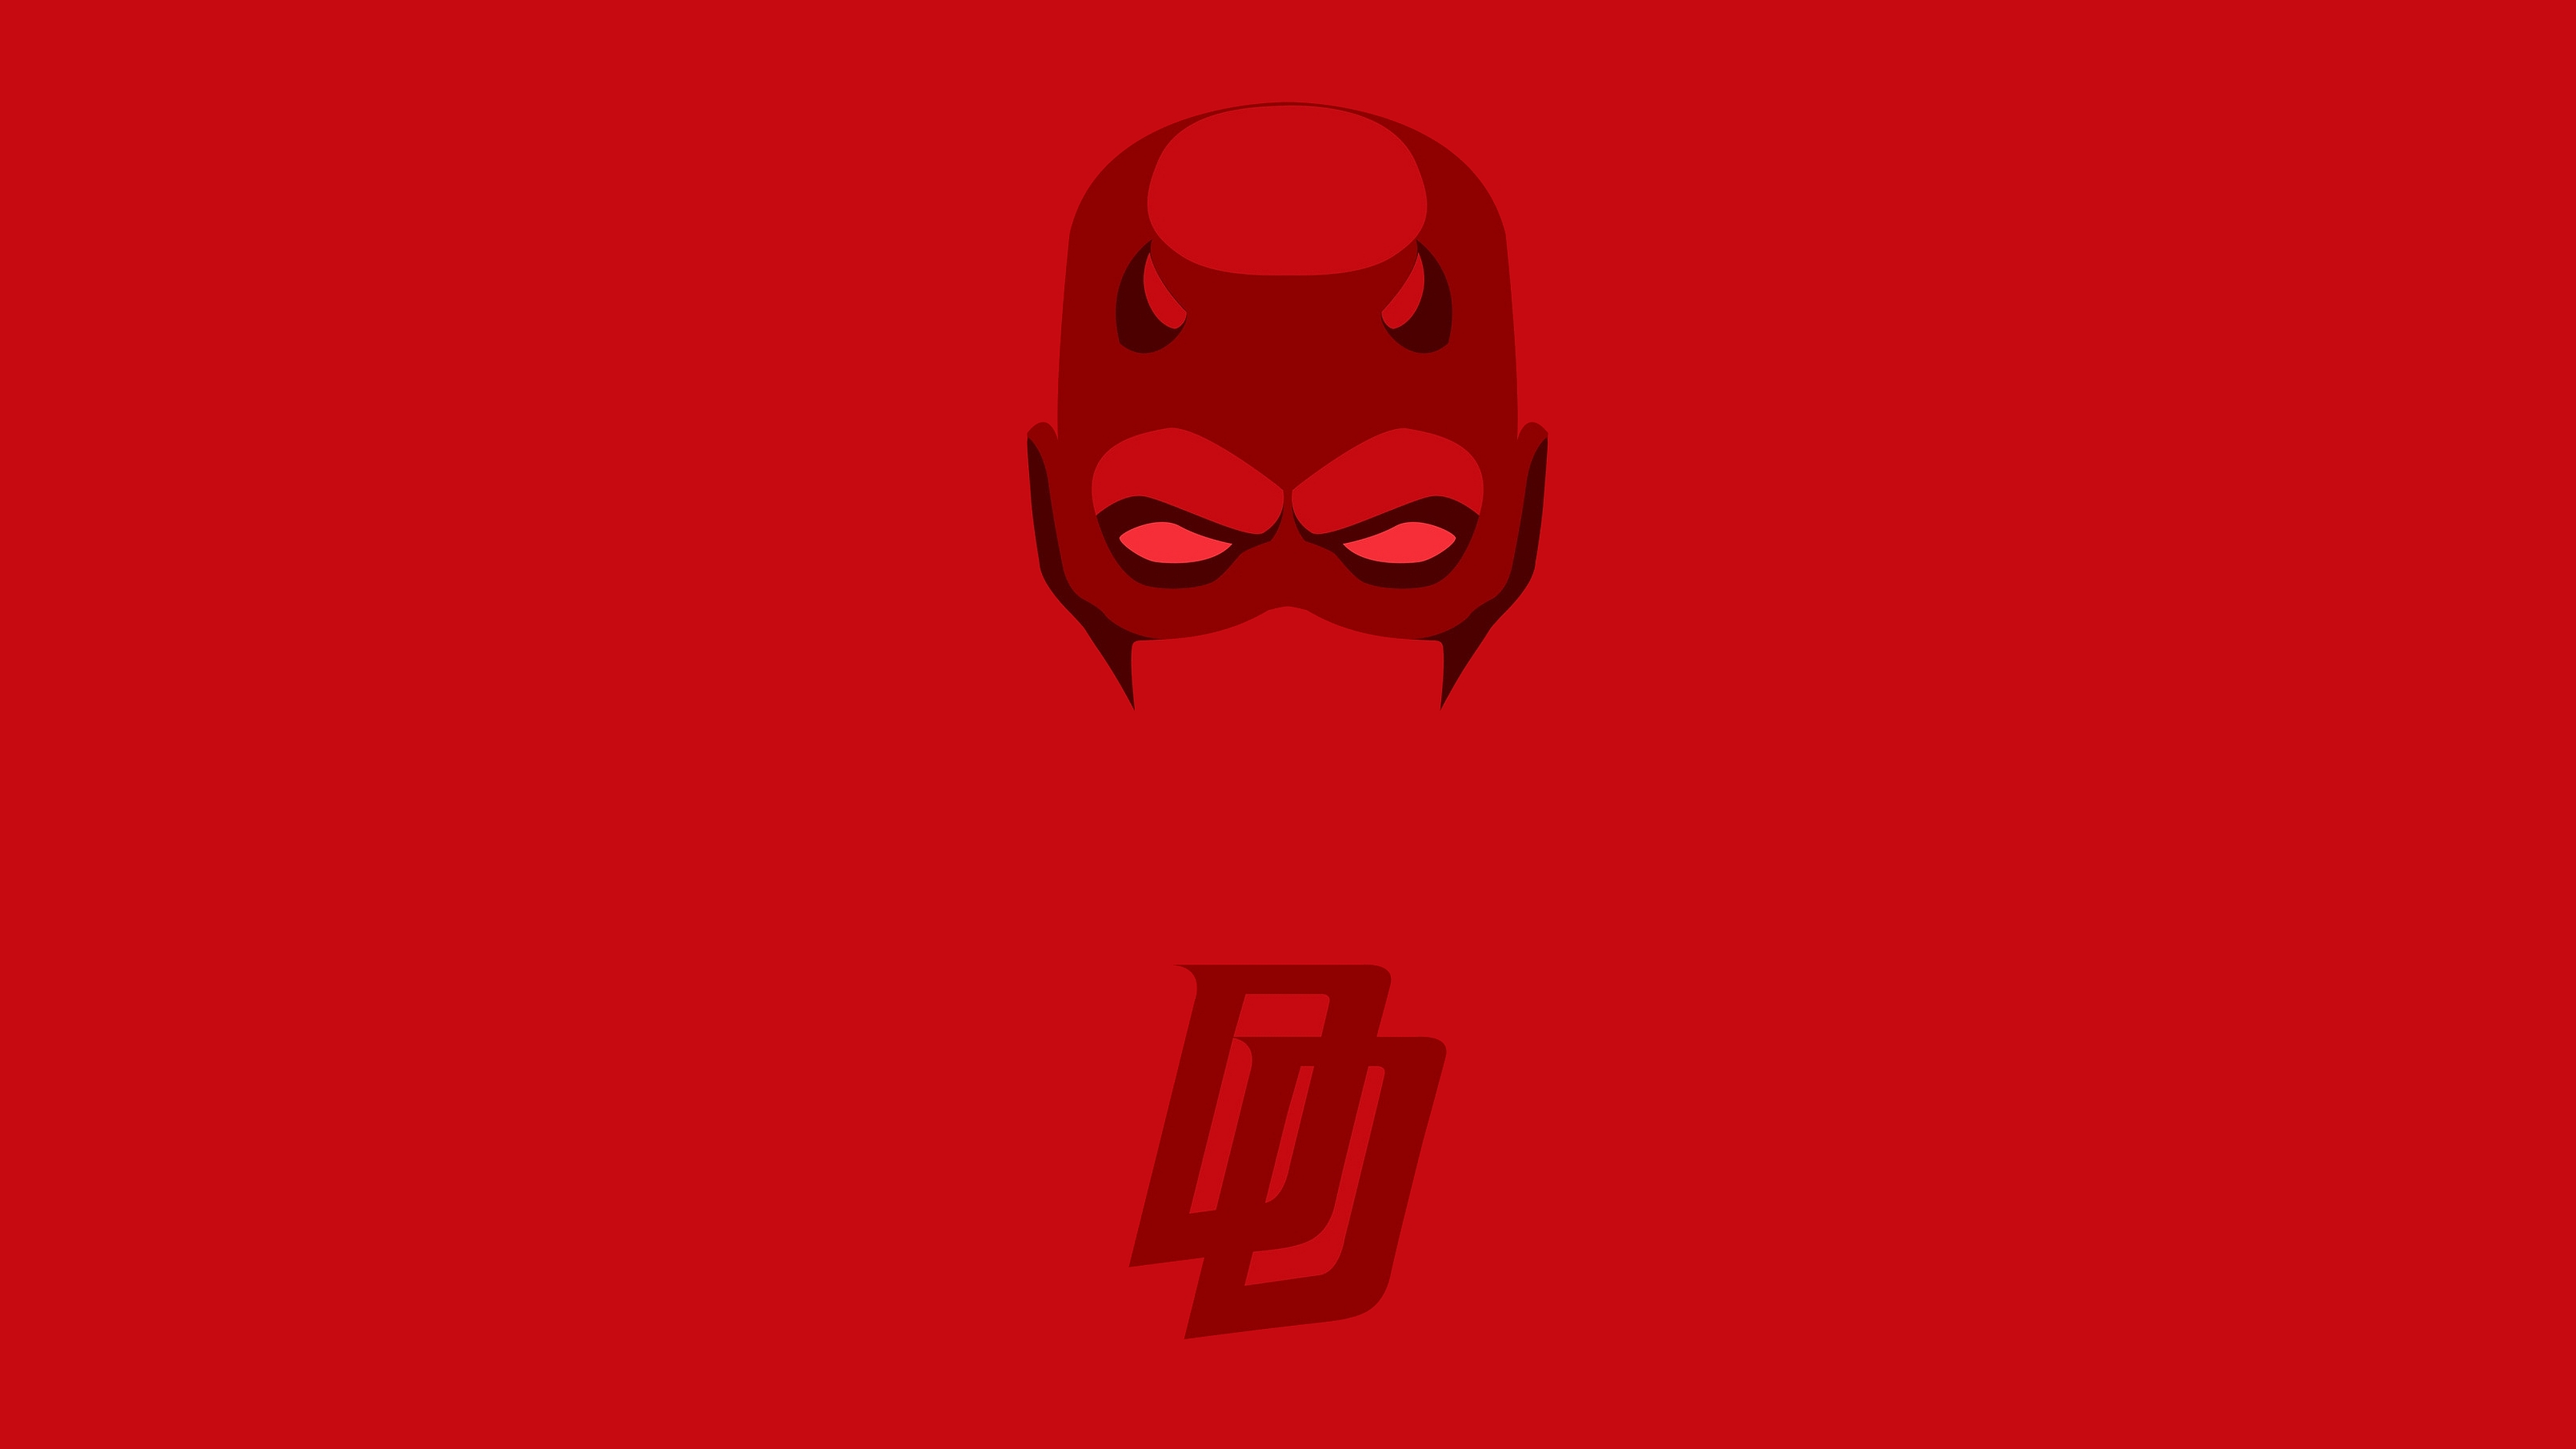 220+ Daredevil HD Wallpapers and Backgrounds